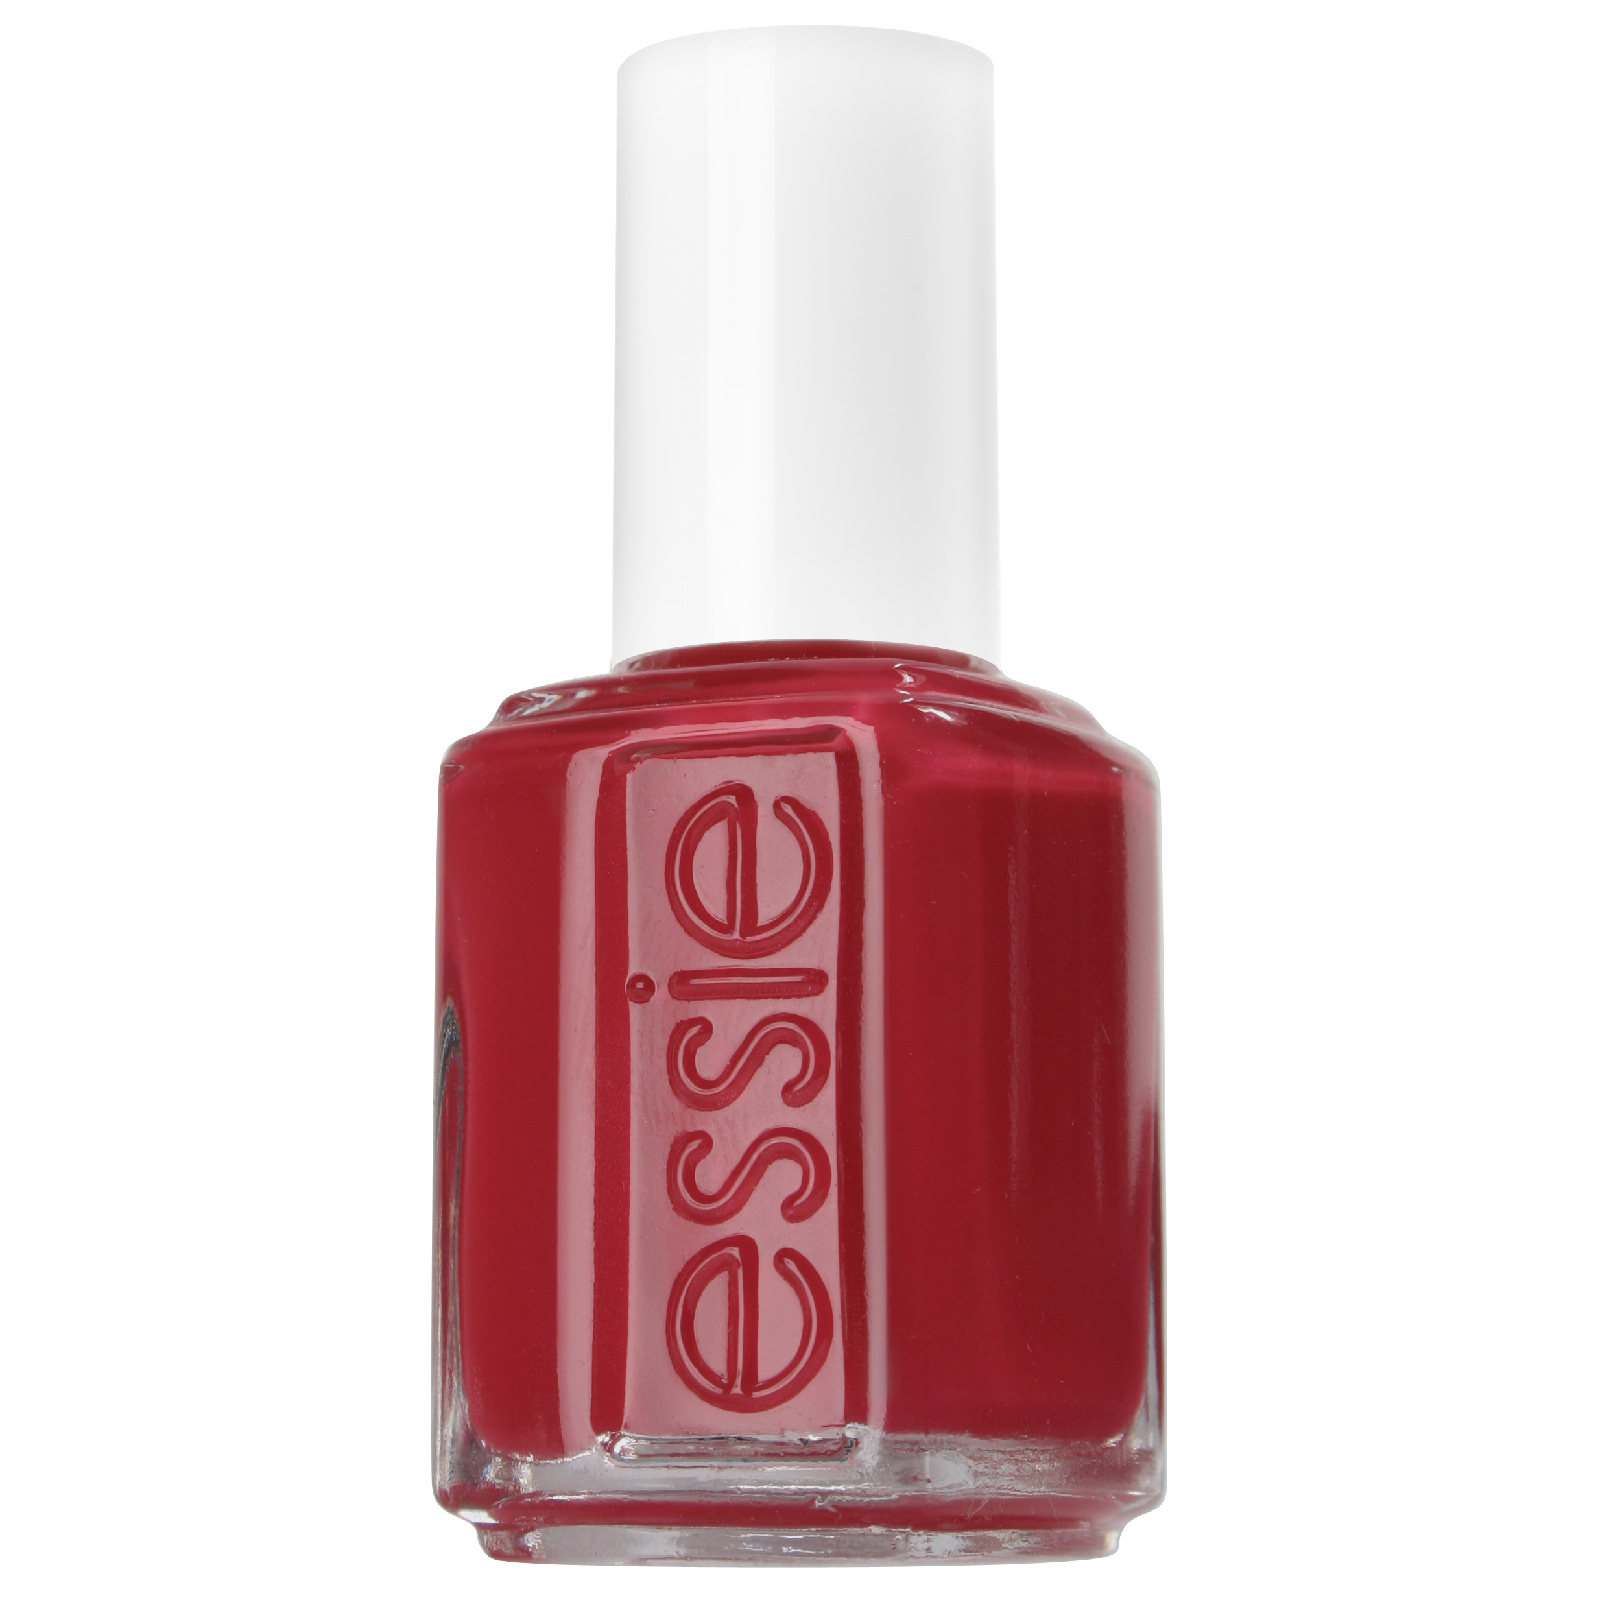 essie Professional Forever Young Nail Varnish (13.5ml)